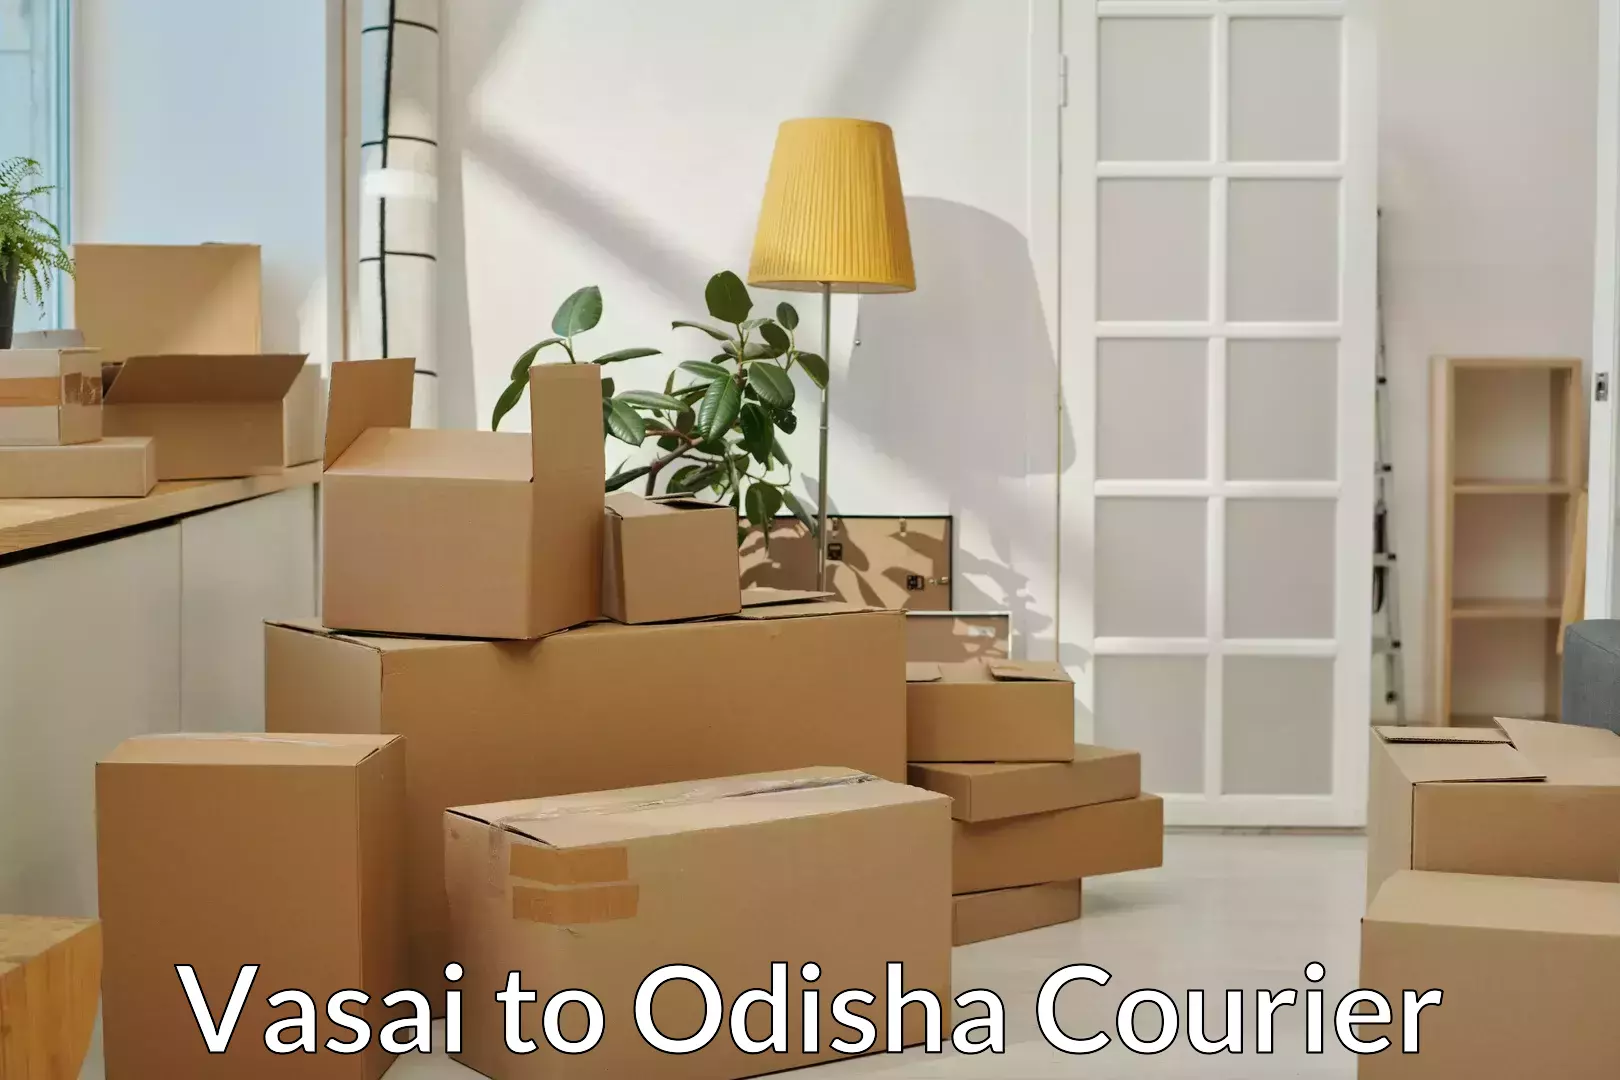 Trusted moving company Vasai to Dhamanagar